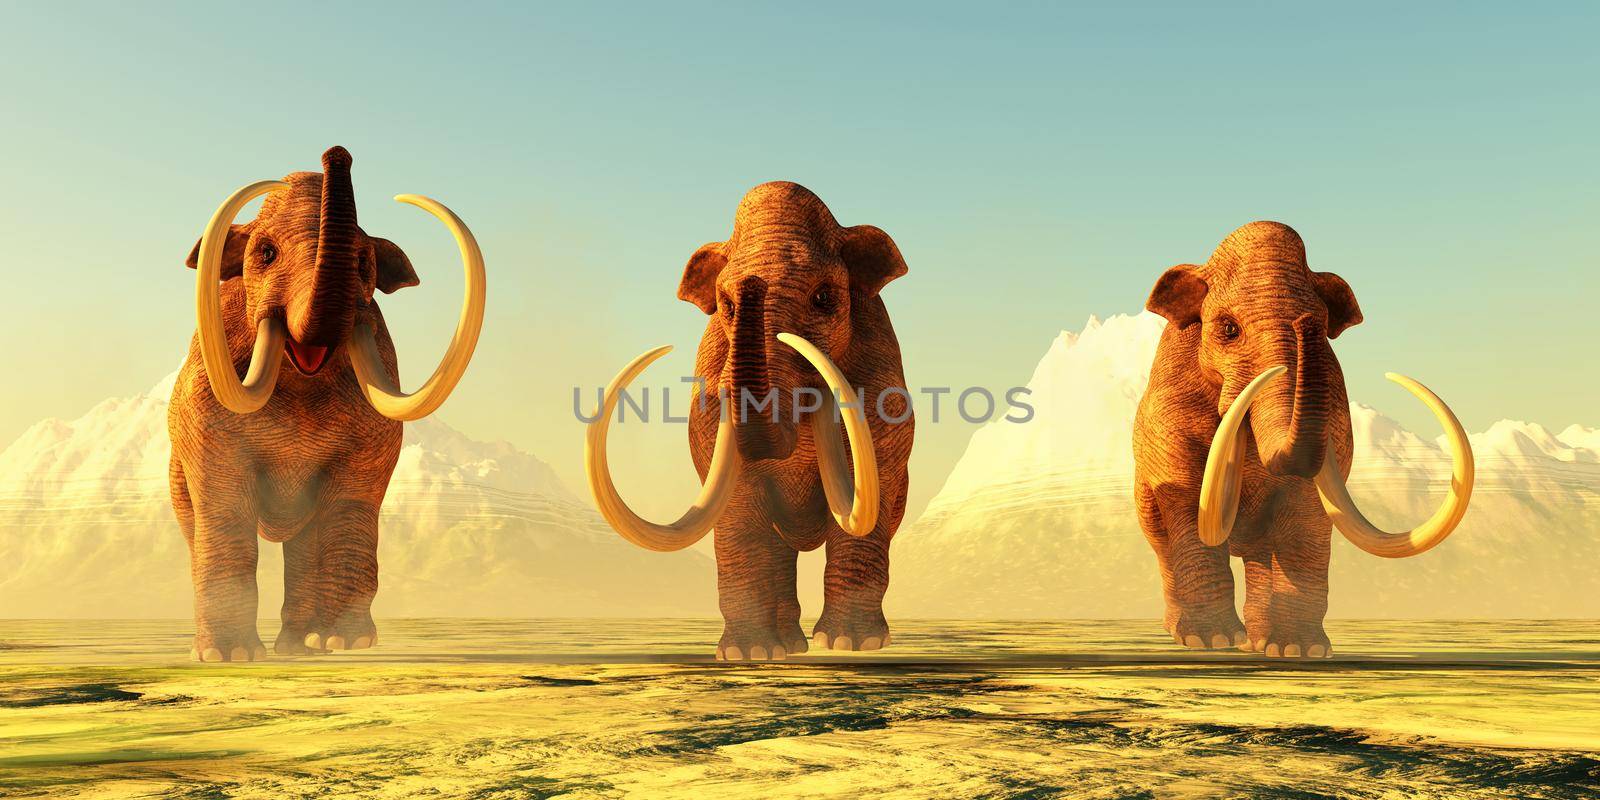 A herd of Columbian Mammoths walk together during the Pleistocene Period of North America.